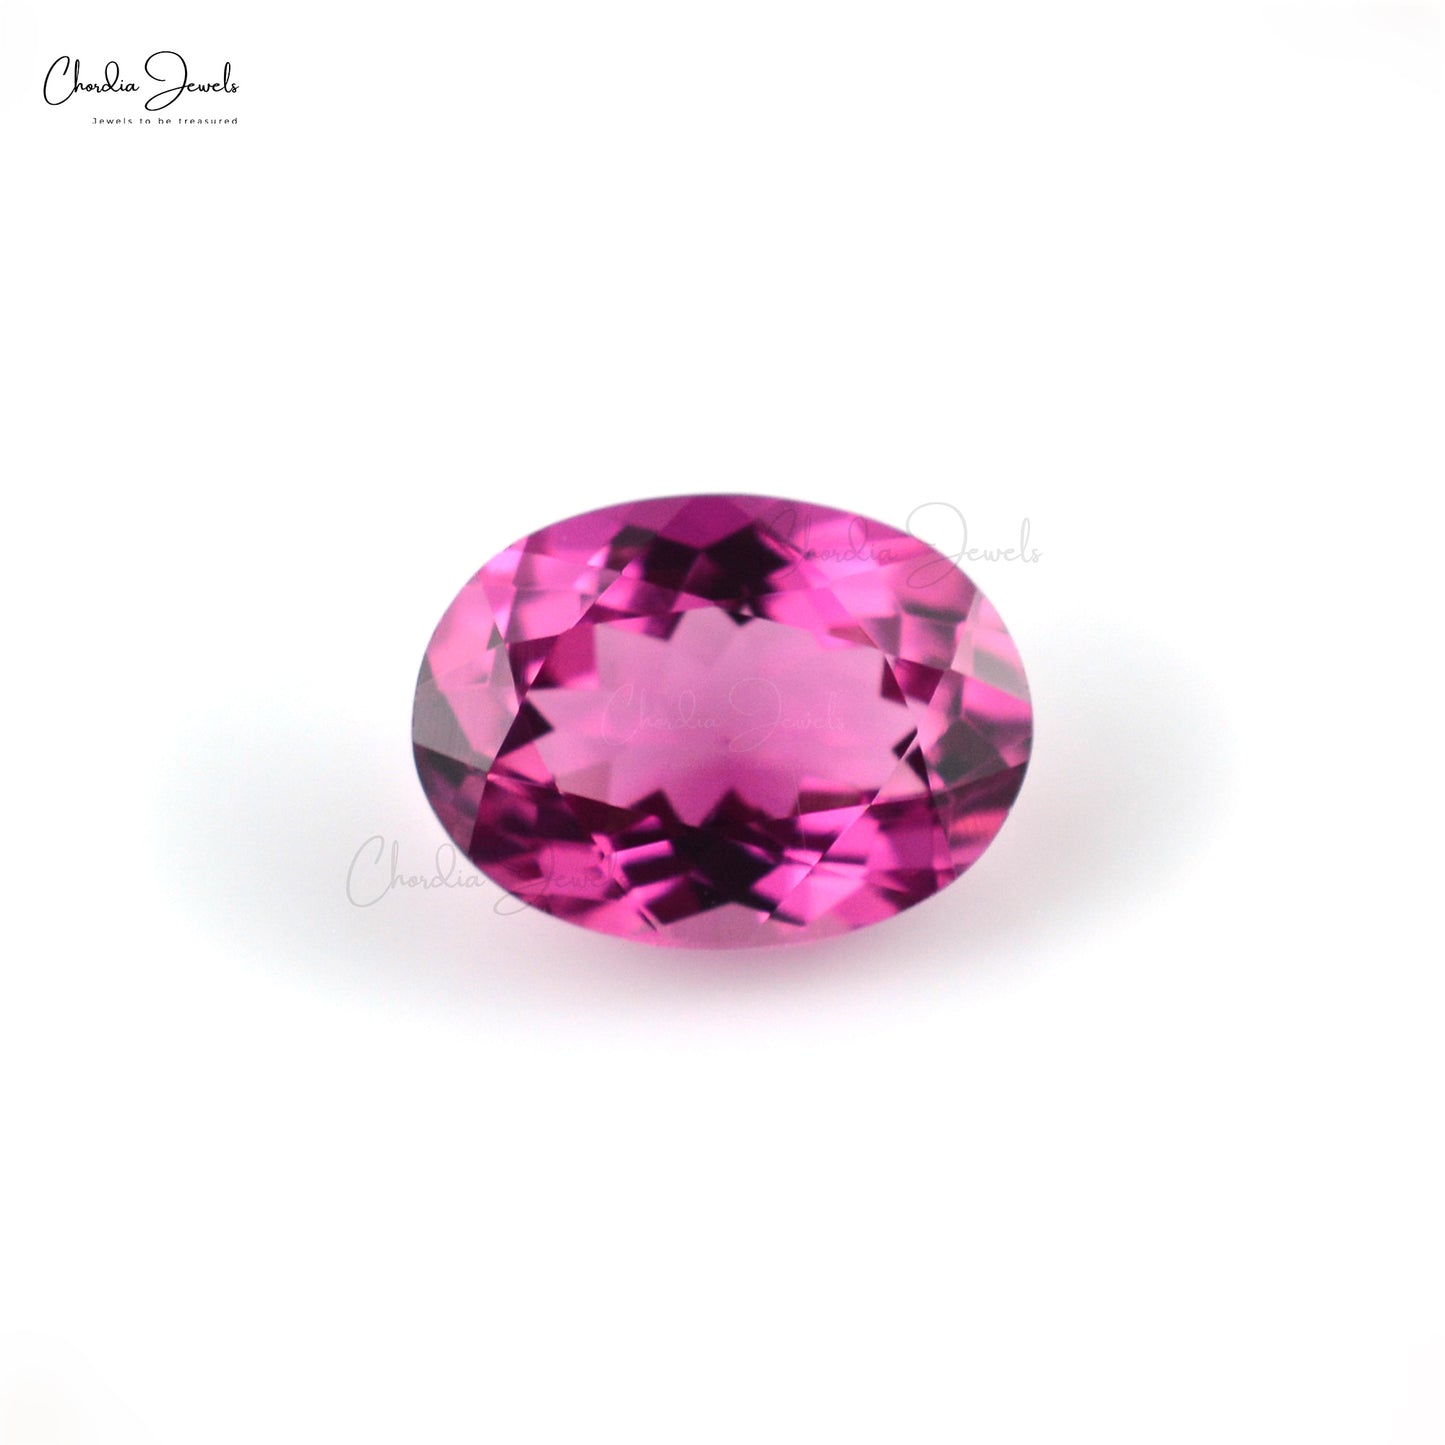 Load image into Gallery viewer, AAA Pink Tourmaline 1.35 Carat Natural Oval Cut Gemstone for Making Rings, 1 Piece
